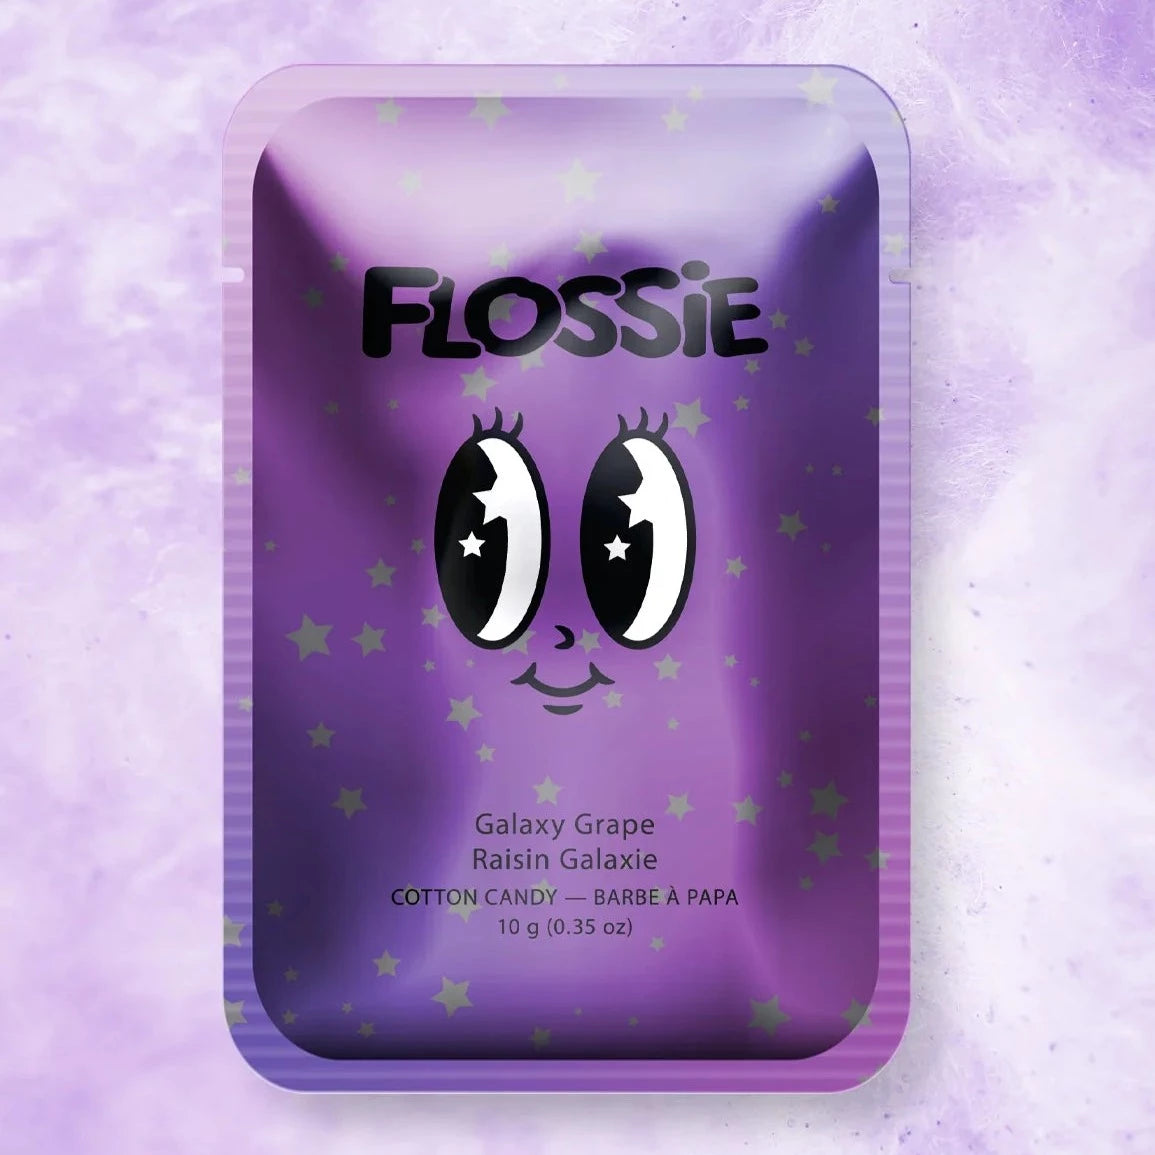 Galaxy Grape Cotton Candy by Flossie